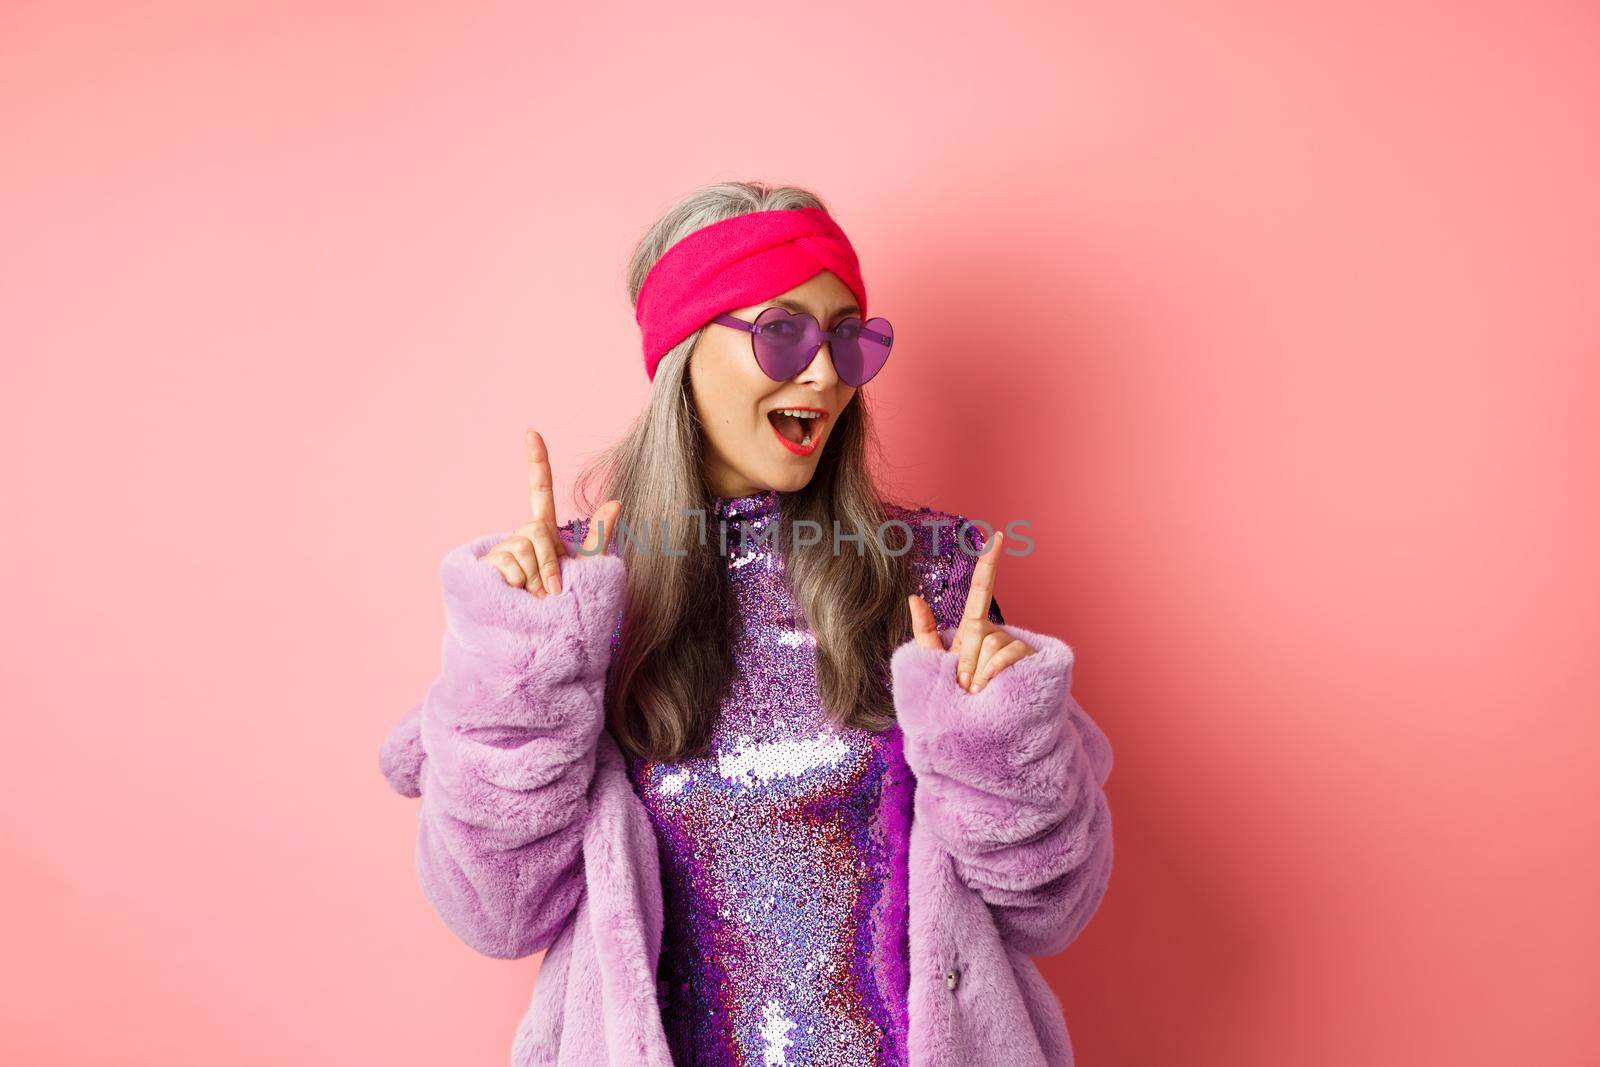 Hipster granny in sunglasses and glittering dress posing for photo with peace, victory signs, standing sassy against pink background.